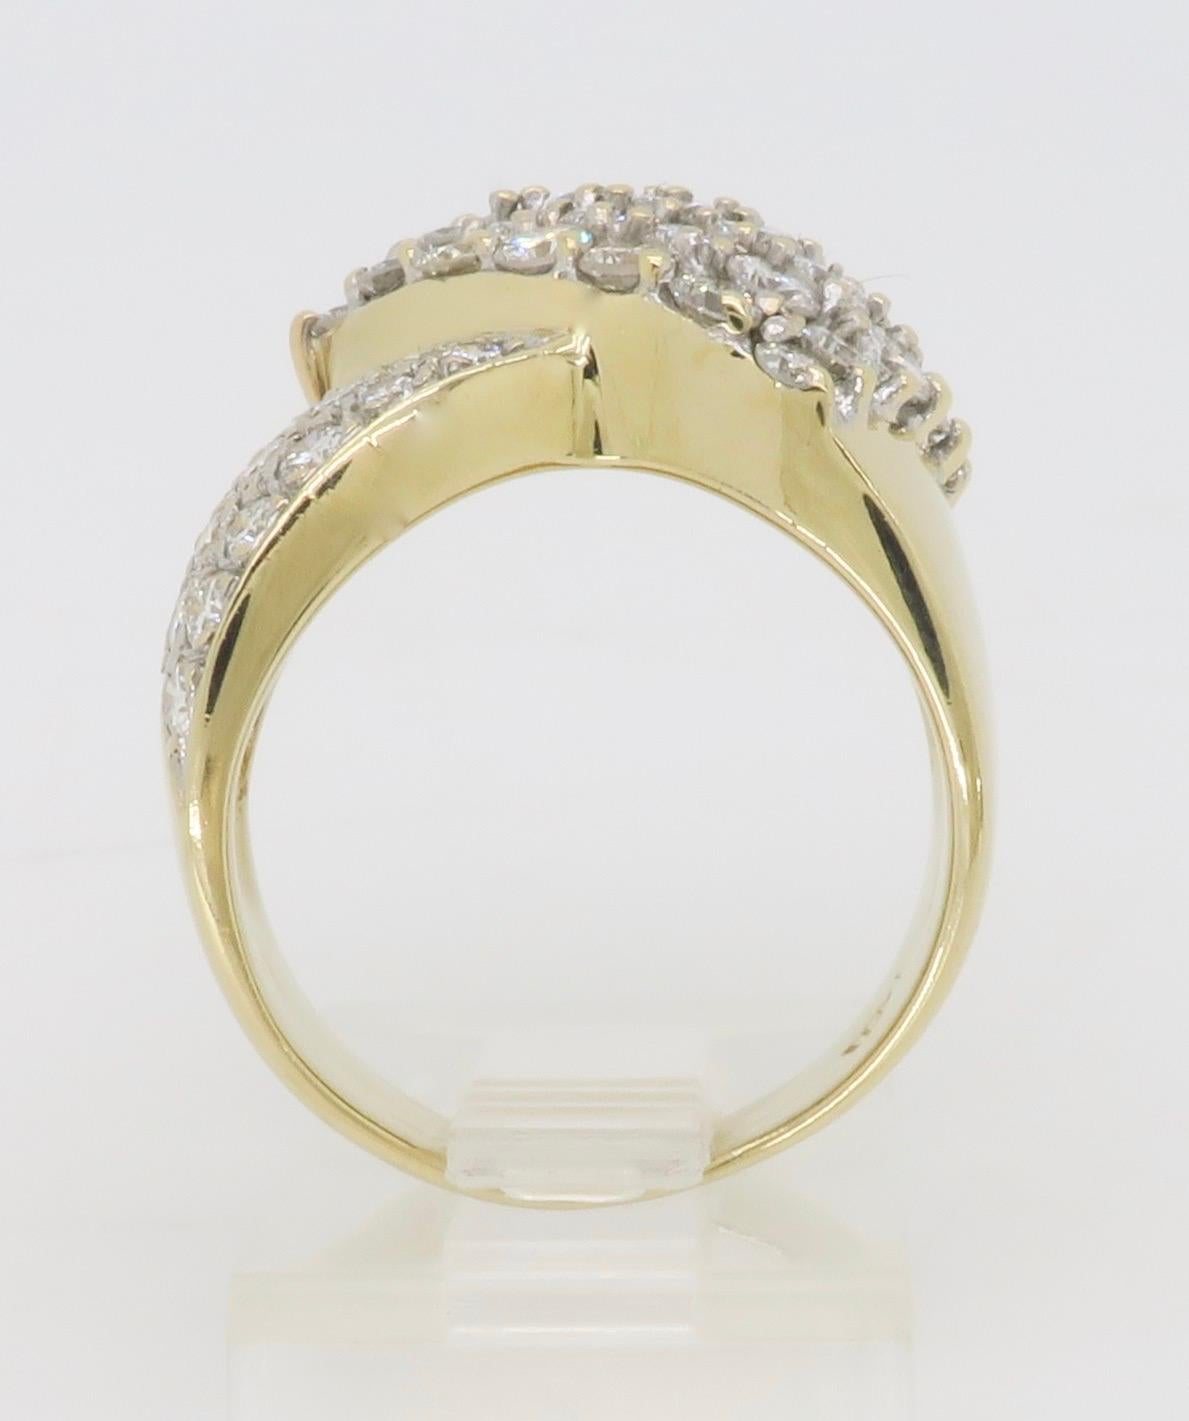 Chic Diamond Bypass Cocktail Ring Made in 14k Yellow Gold 5